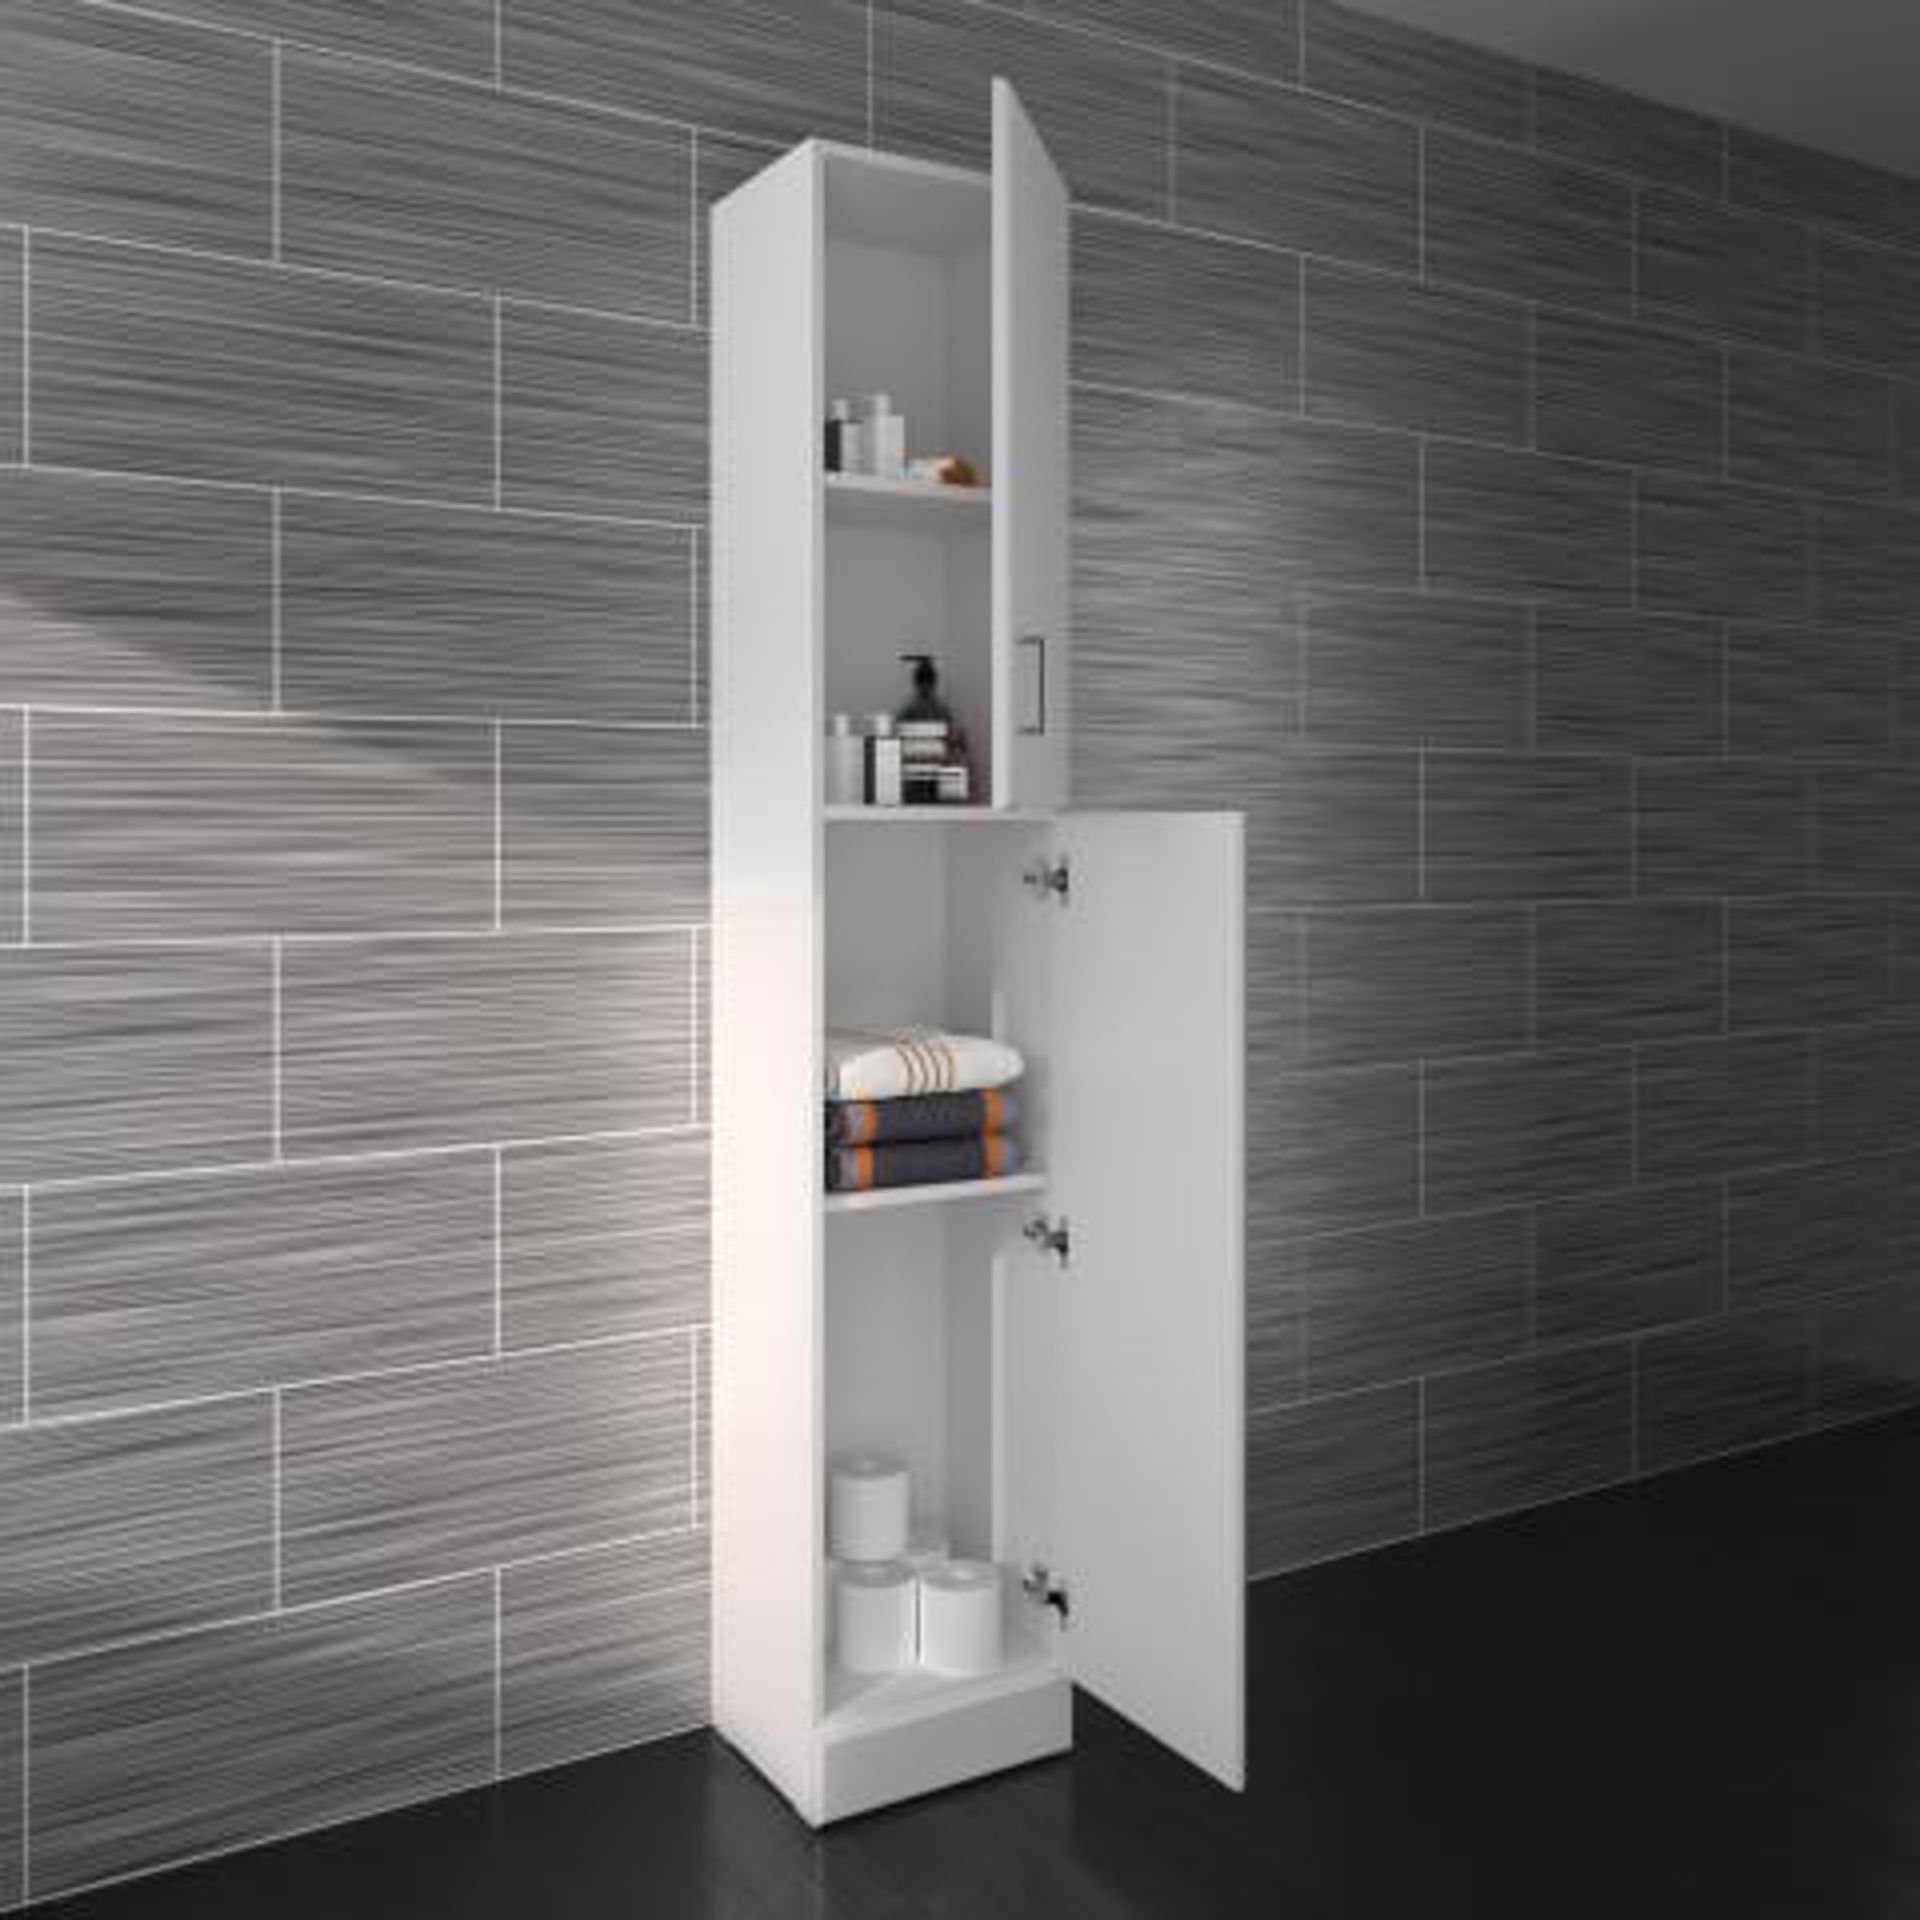 (P28) 1900x330mm Quartz Gloss White Tall Storage Cabinet - Floor Standing. RRP £251.99. This - Image 3 of 4